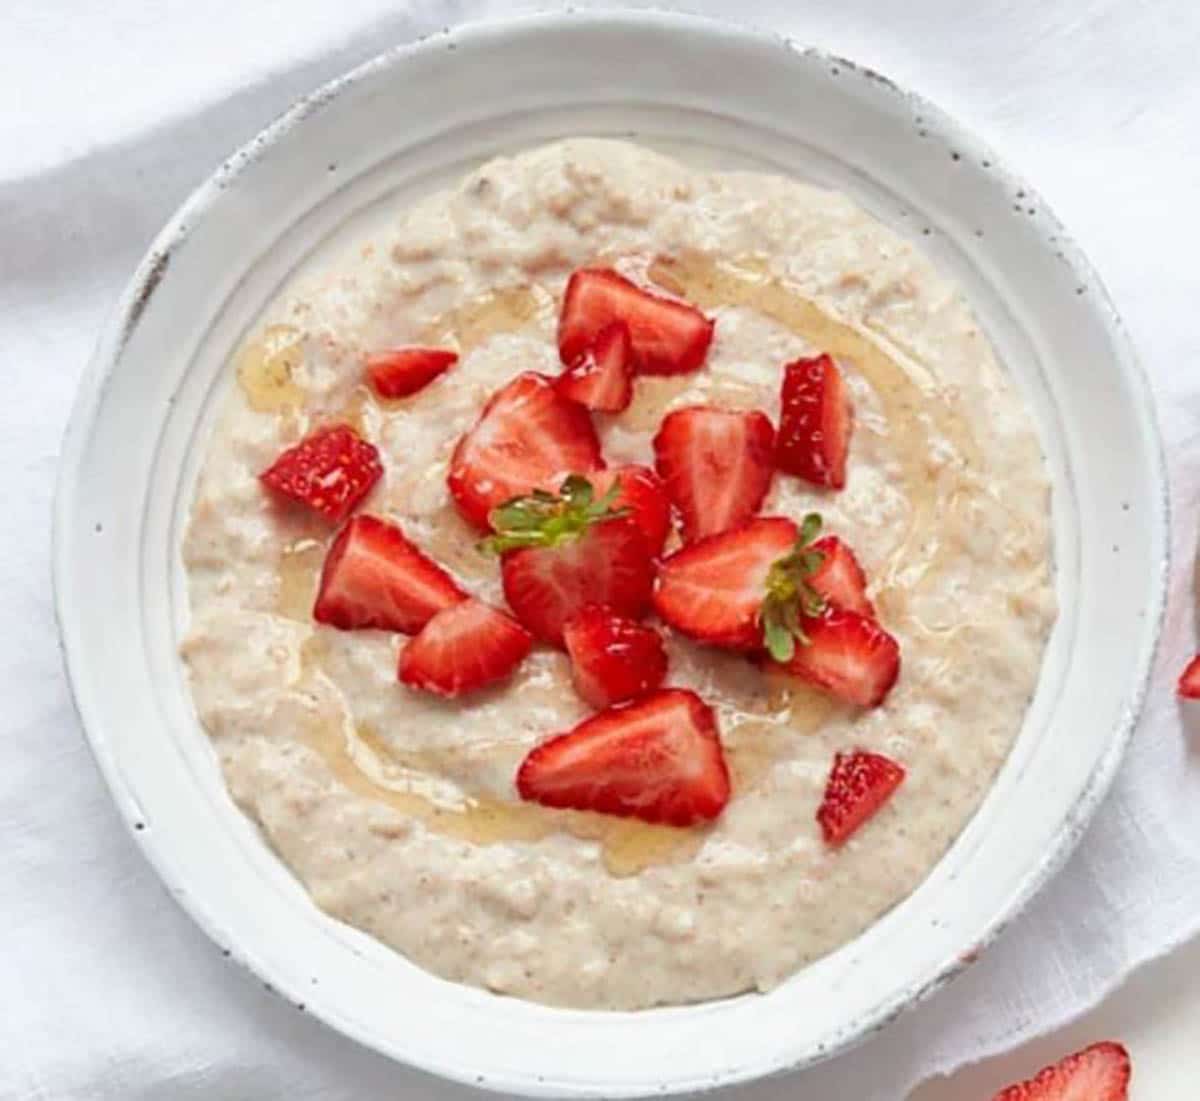 Three Grain Oatmeal topped with sliced strawberries